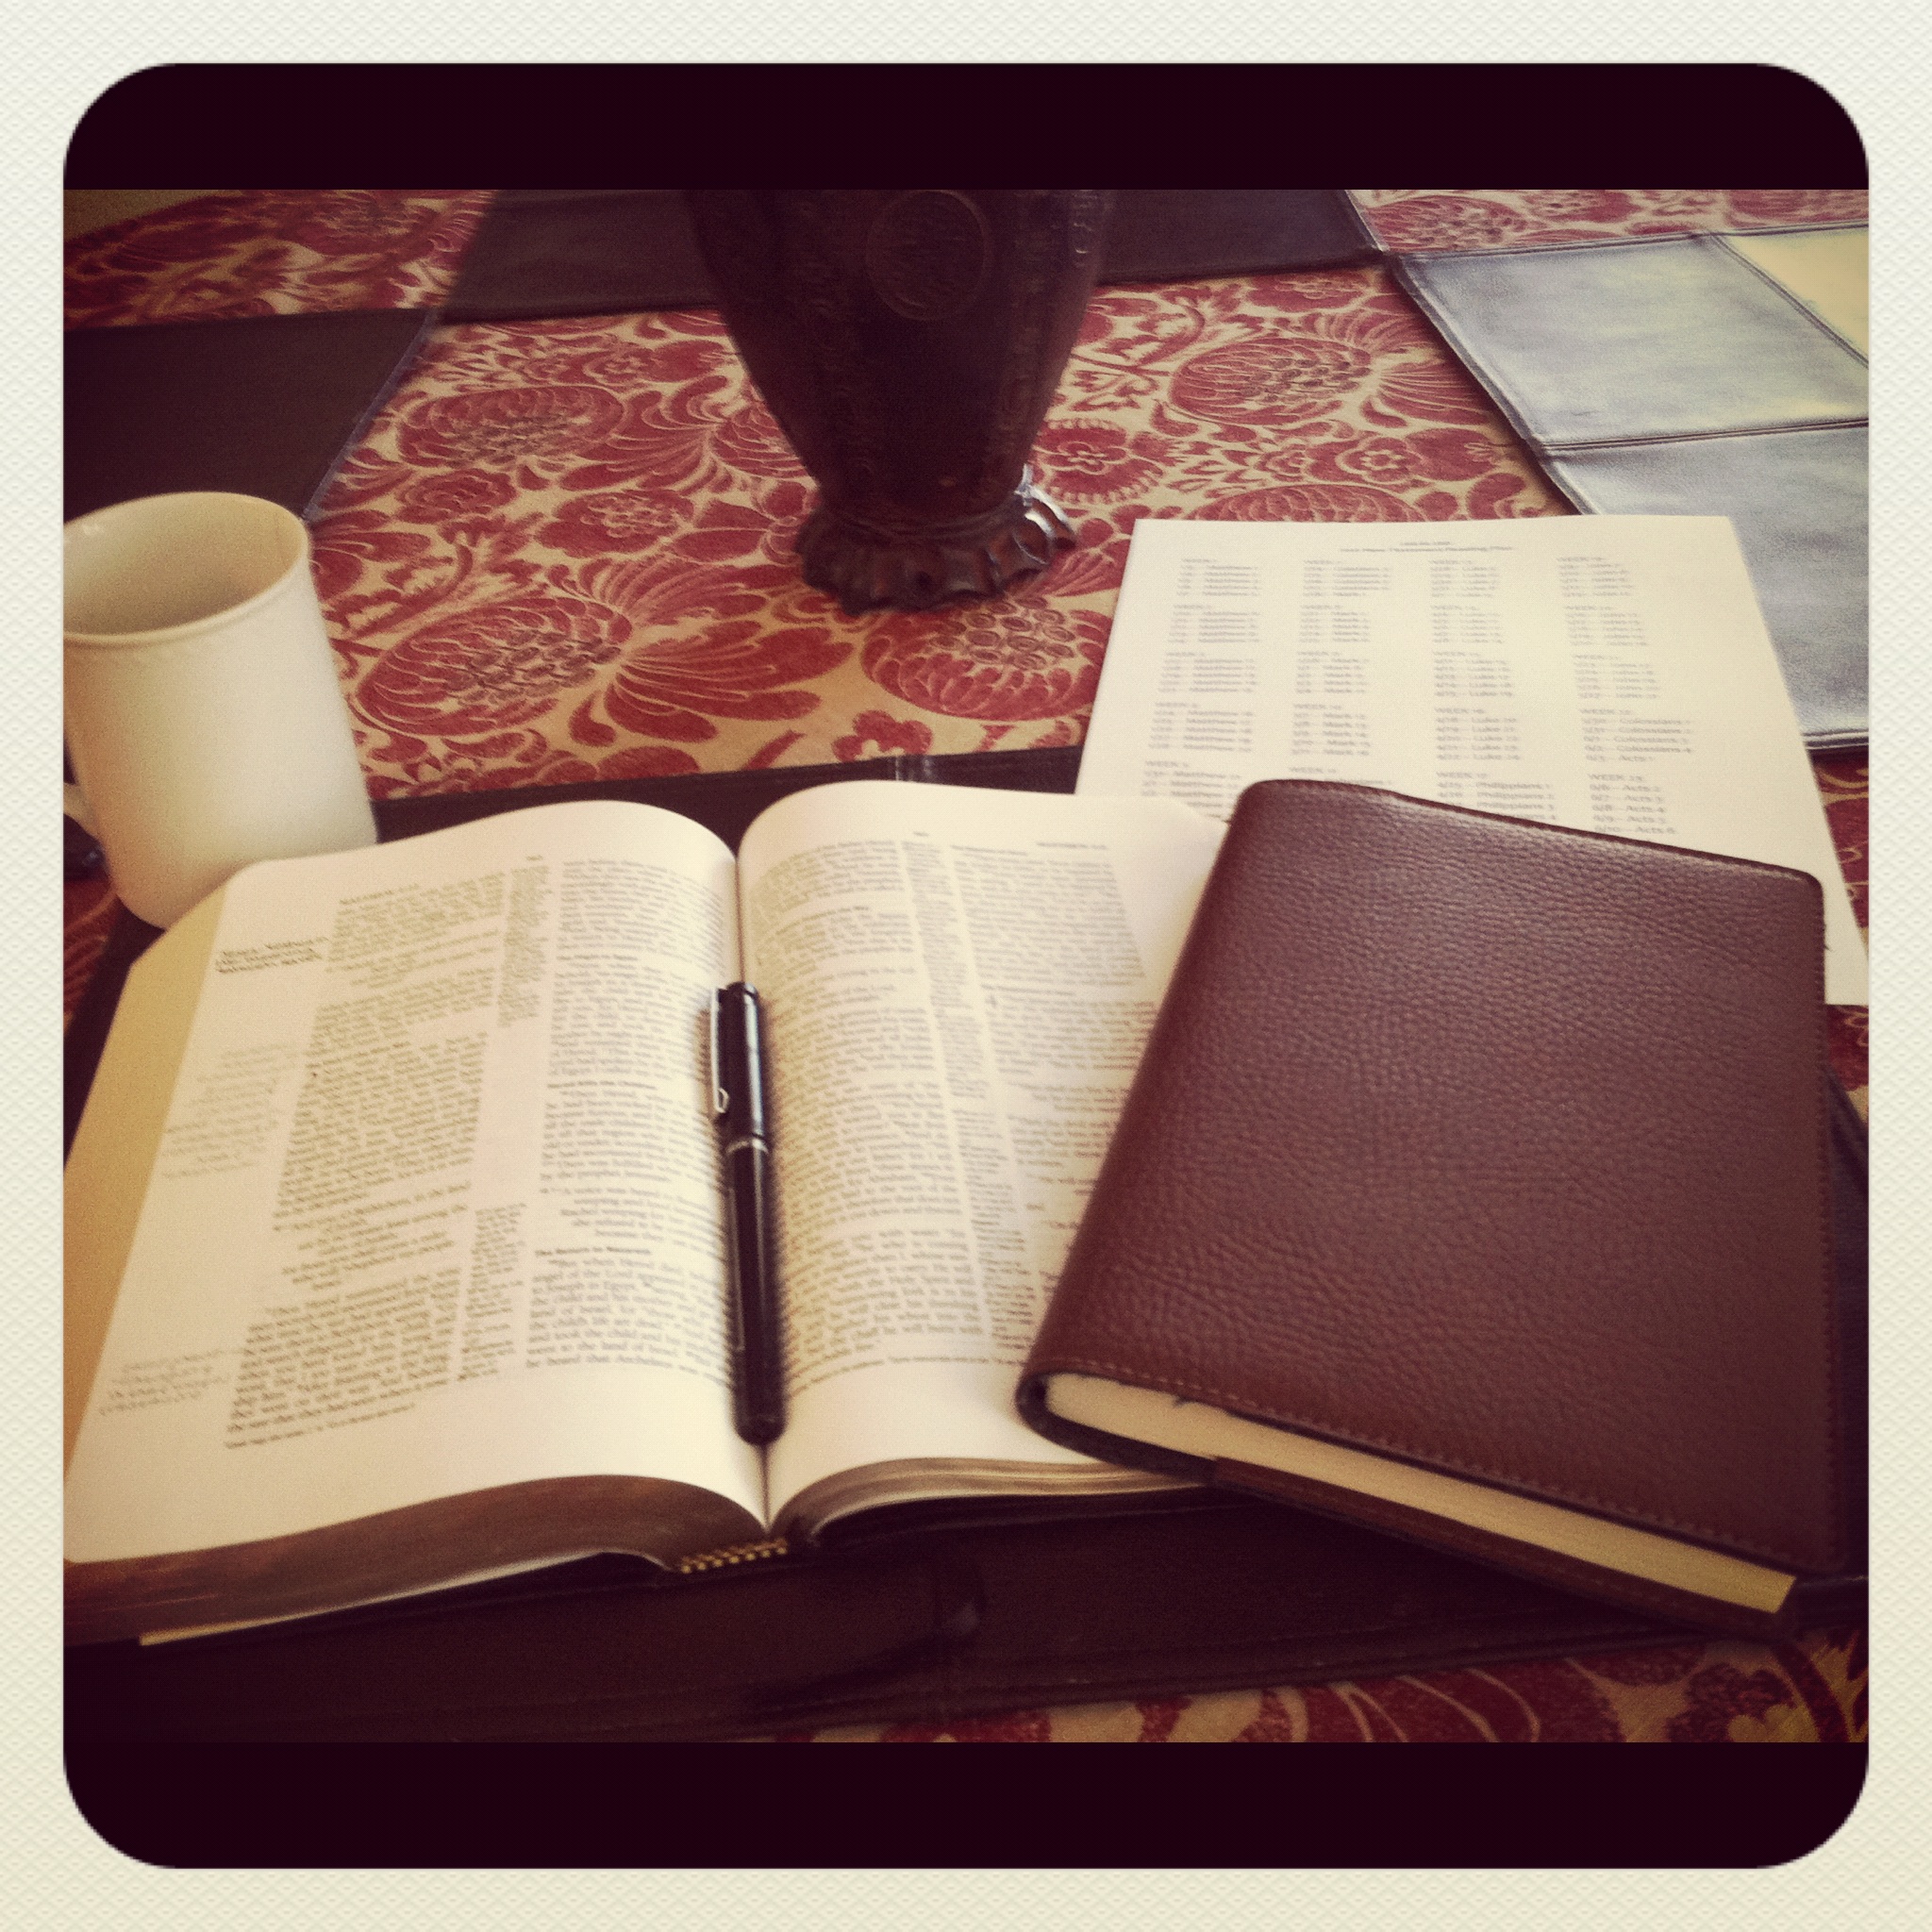 Savoring the New Testament in 2012